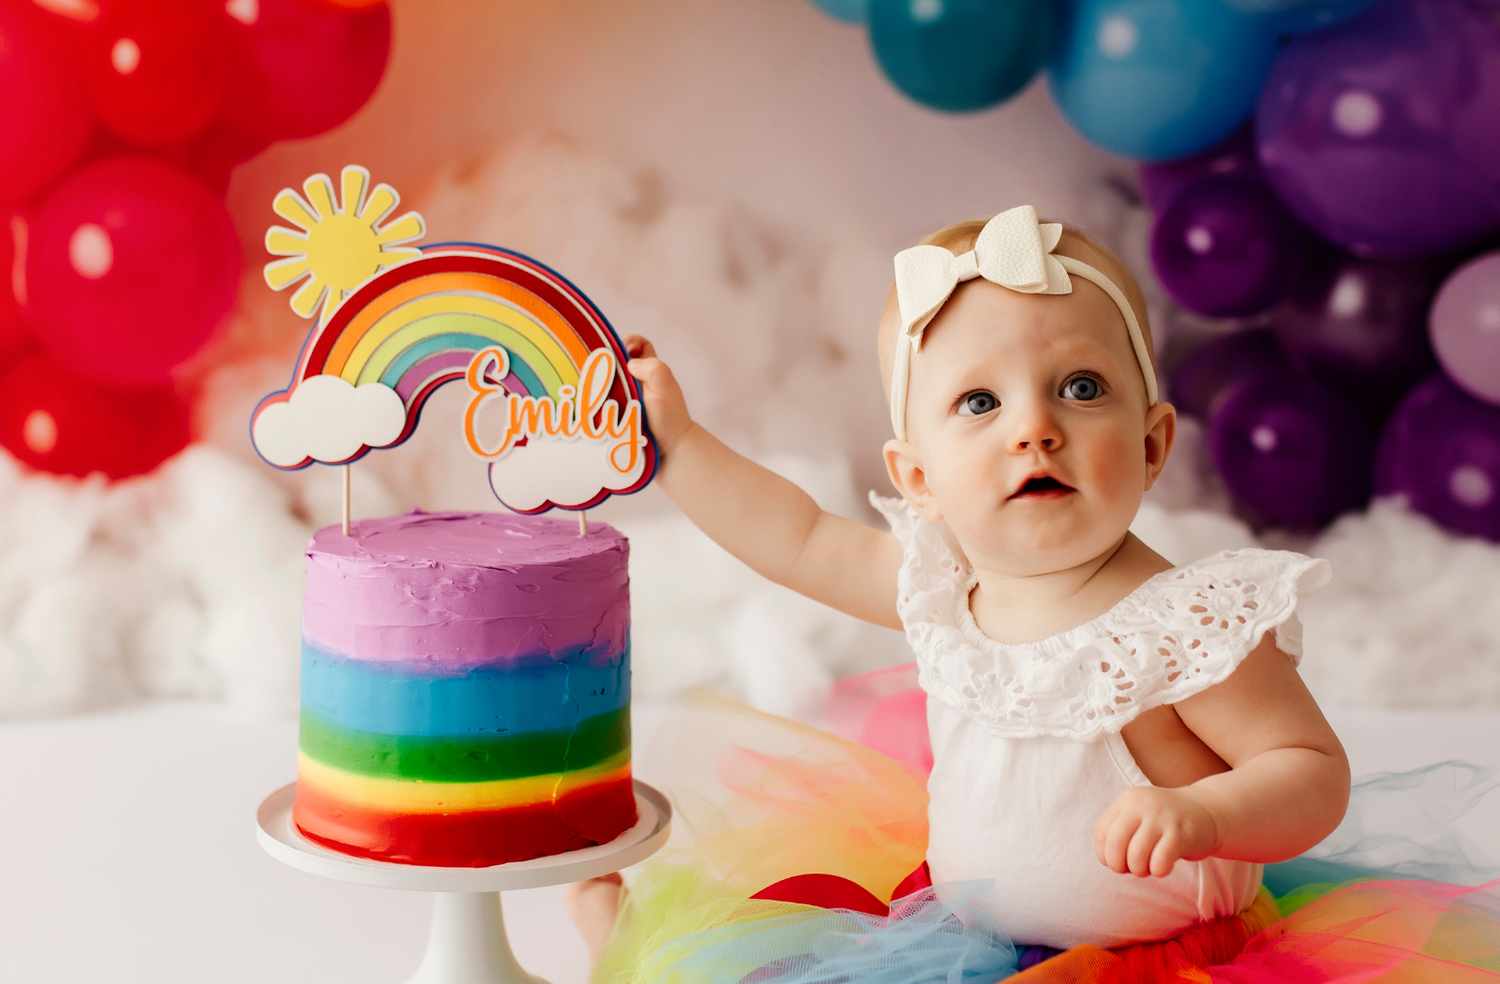 One Year Old Caucasian Baby Girl with Blue Eyes Dressed in White Frill Top and Rainbow Tutu Sitting in Front of Rainbow Balloon Backdrop Next To a Layered Rainbow Cake on a White Stand with a Rainbow Custom Cake Topper made of Layered Cardstock With a Brighth Yellow Sun Peeking out Behind the Rainbow. The name Emily is in Orange on the Cake Topper, and the Baby is Reaching for it while looking up above the camera lens. 